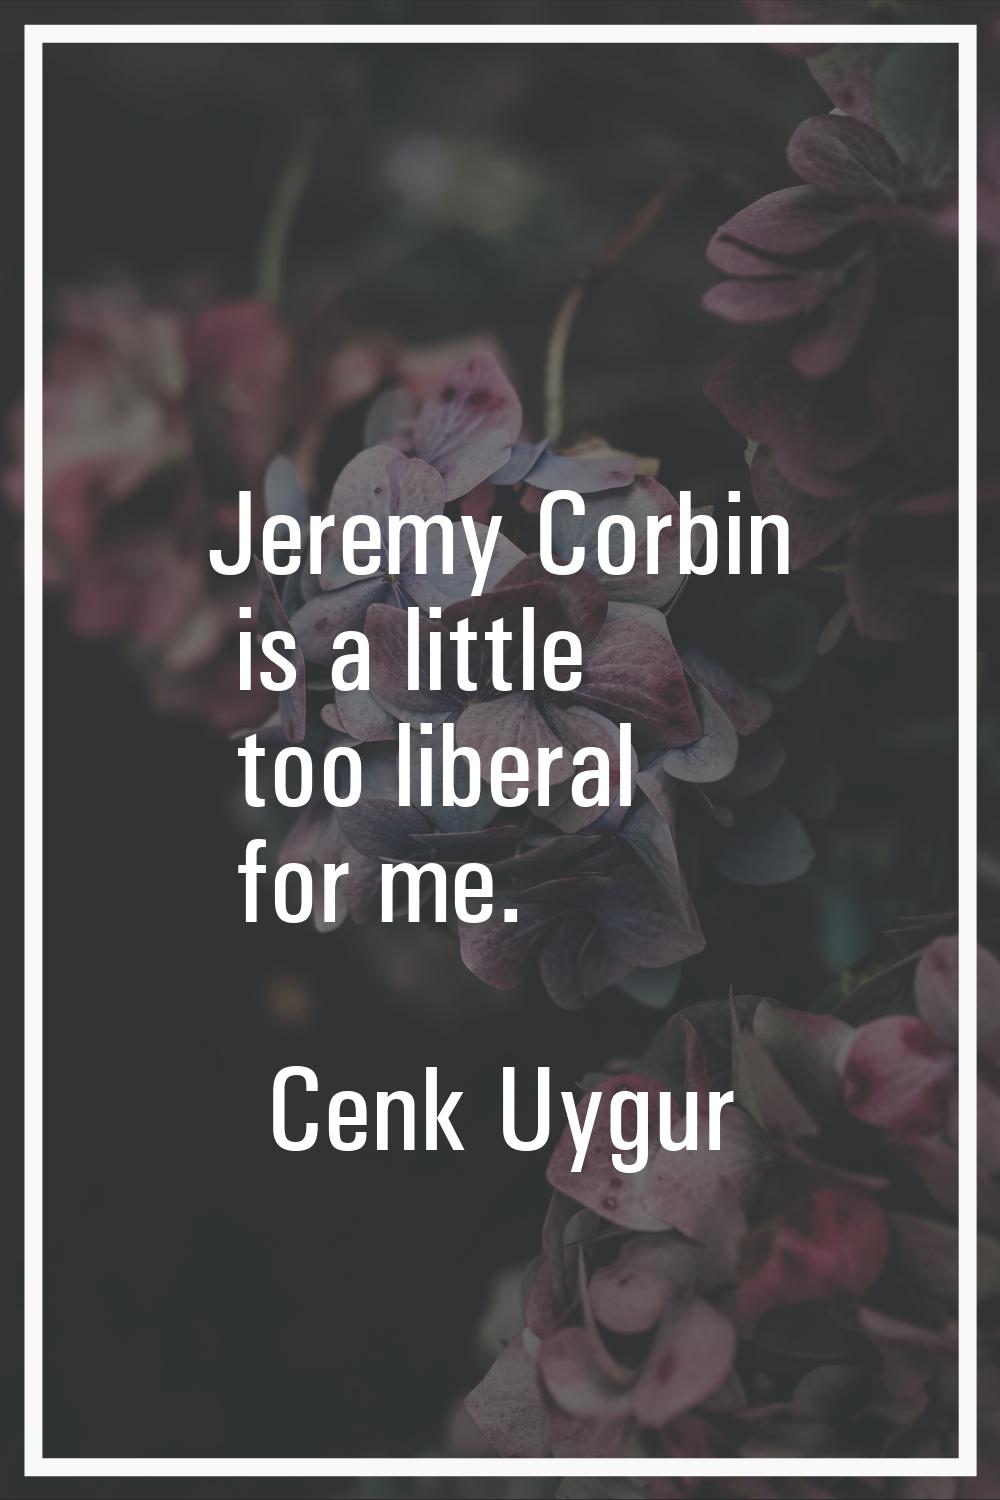 Jeremy Corbin is a little too liberal for me.